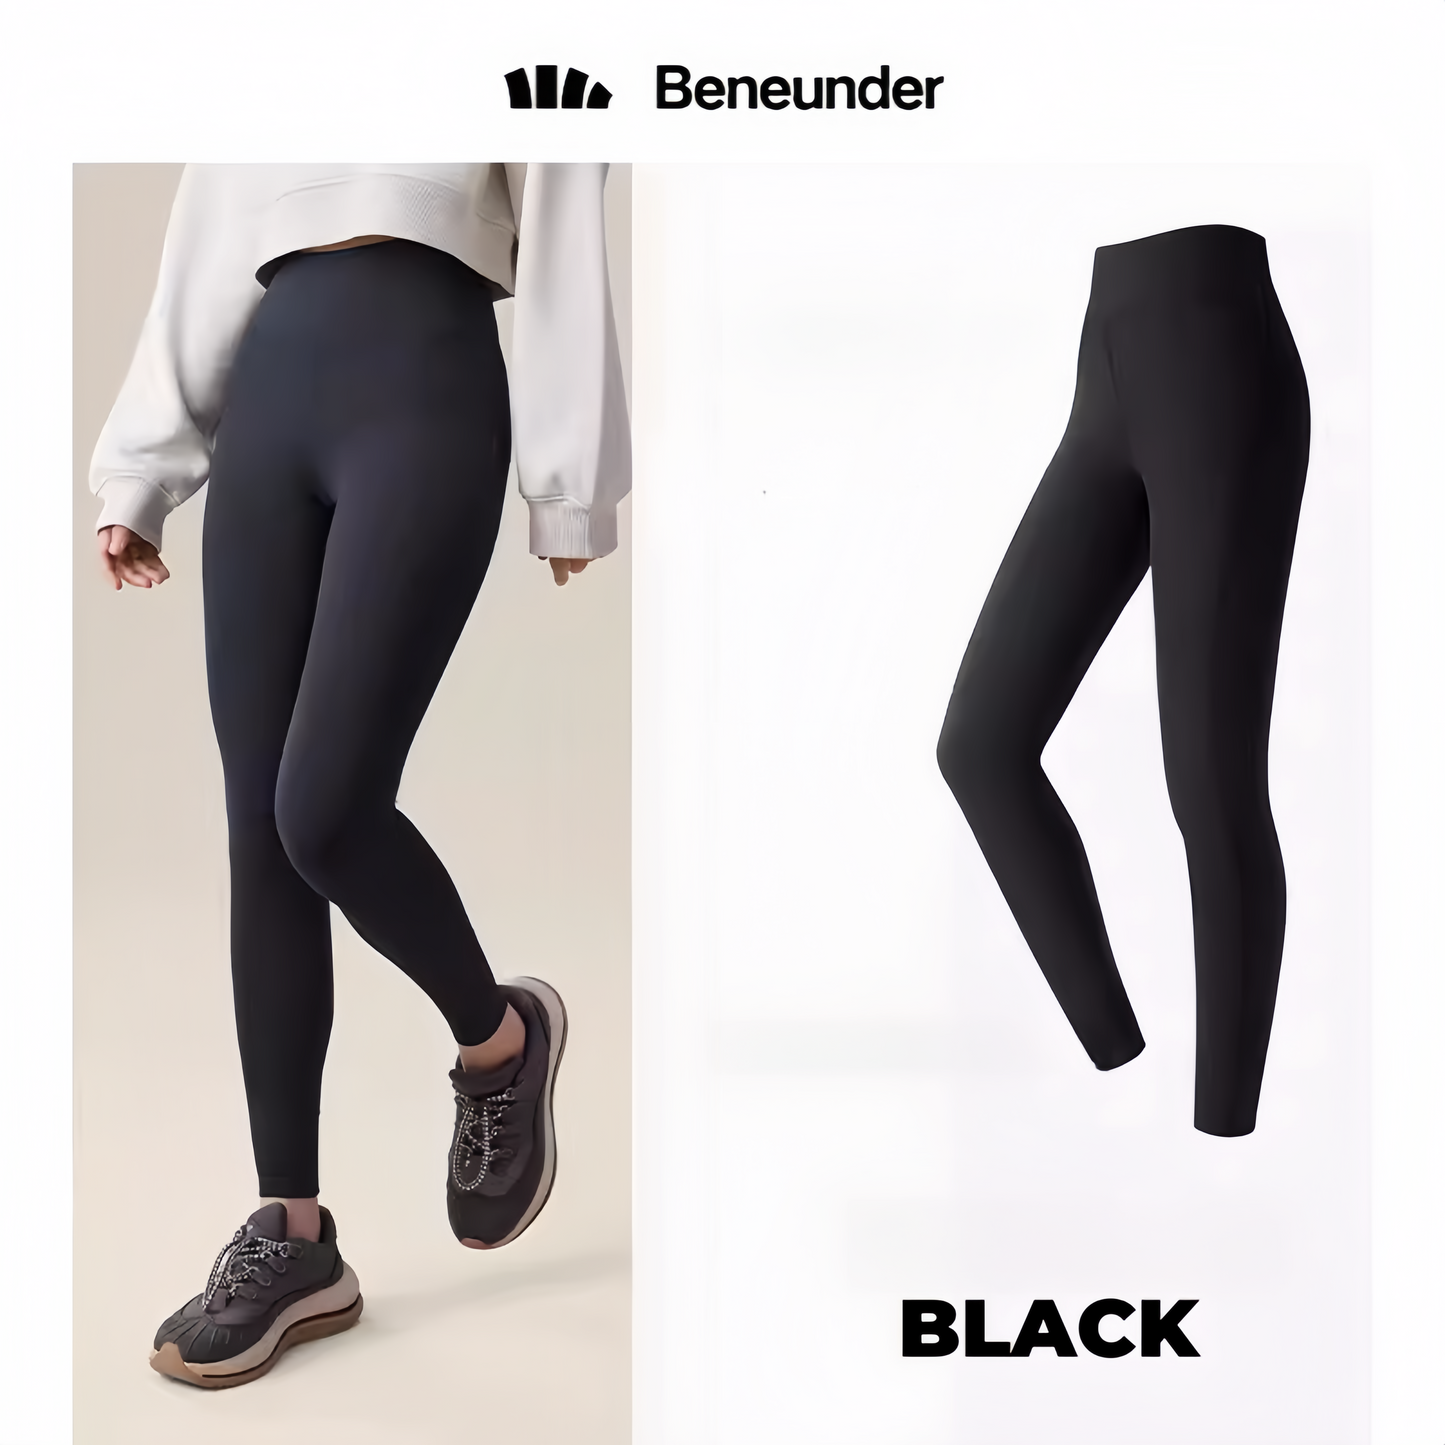 BENEUNDER Leggings for Women Gym Workout Lounge High Waisted Shaping Bottoms uttery Soft Yoga Pants